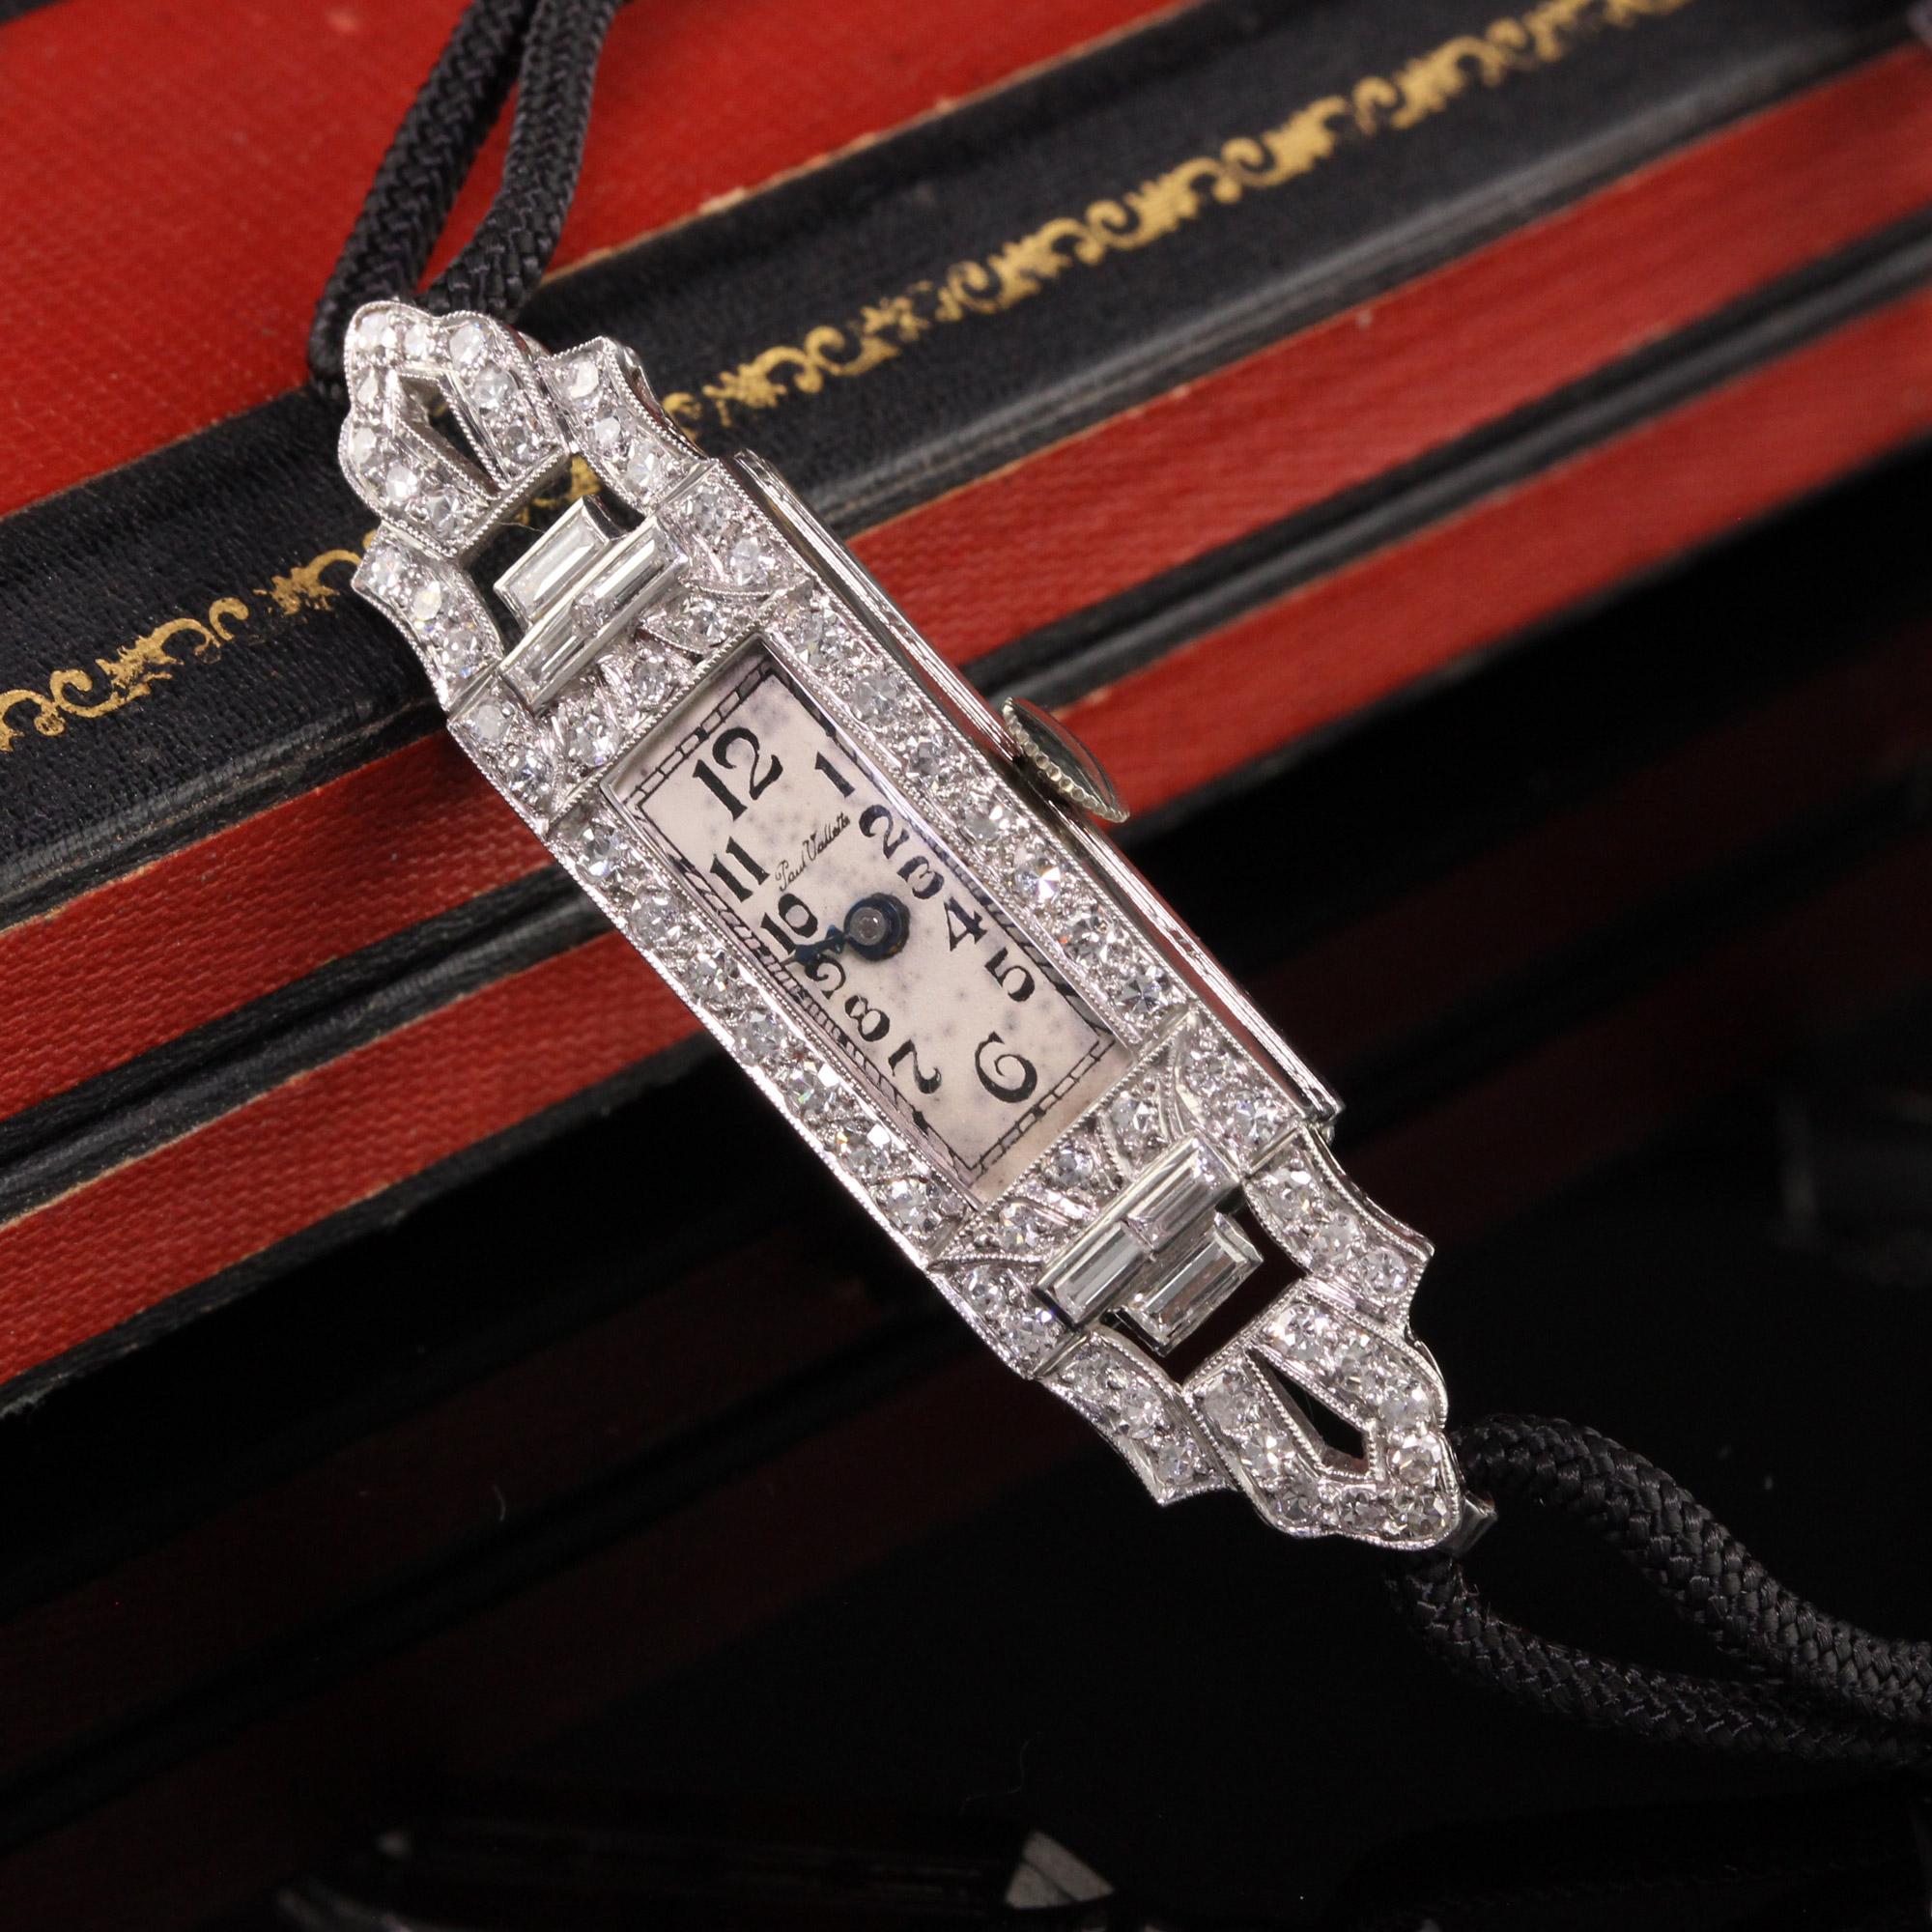 Beautiful Antique Art Deco Paul Vallette Diamond Baguette Evening Watch. This beautiful watch is in amazing condition and is running. The band of the watch is a cord with a base metal buckle.

Item #W0005

Metal: Platinum

Weight: 14.8